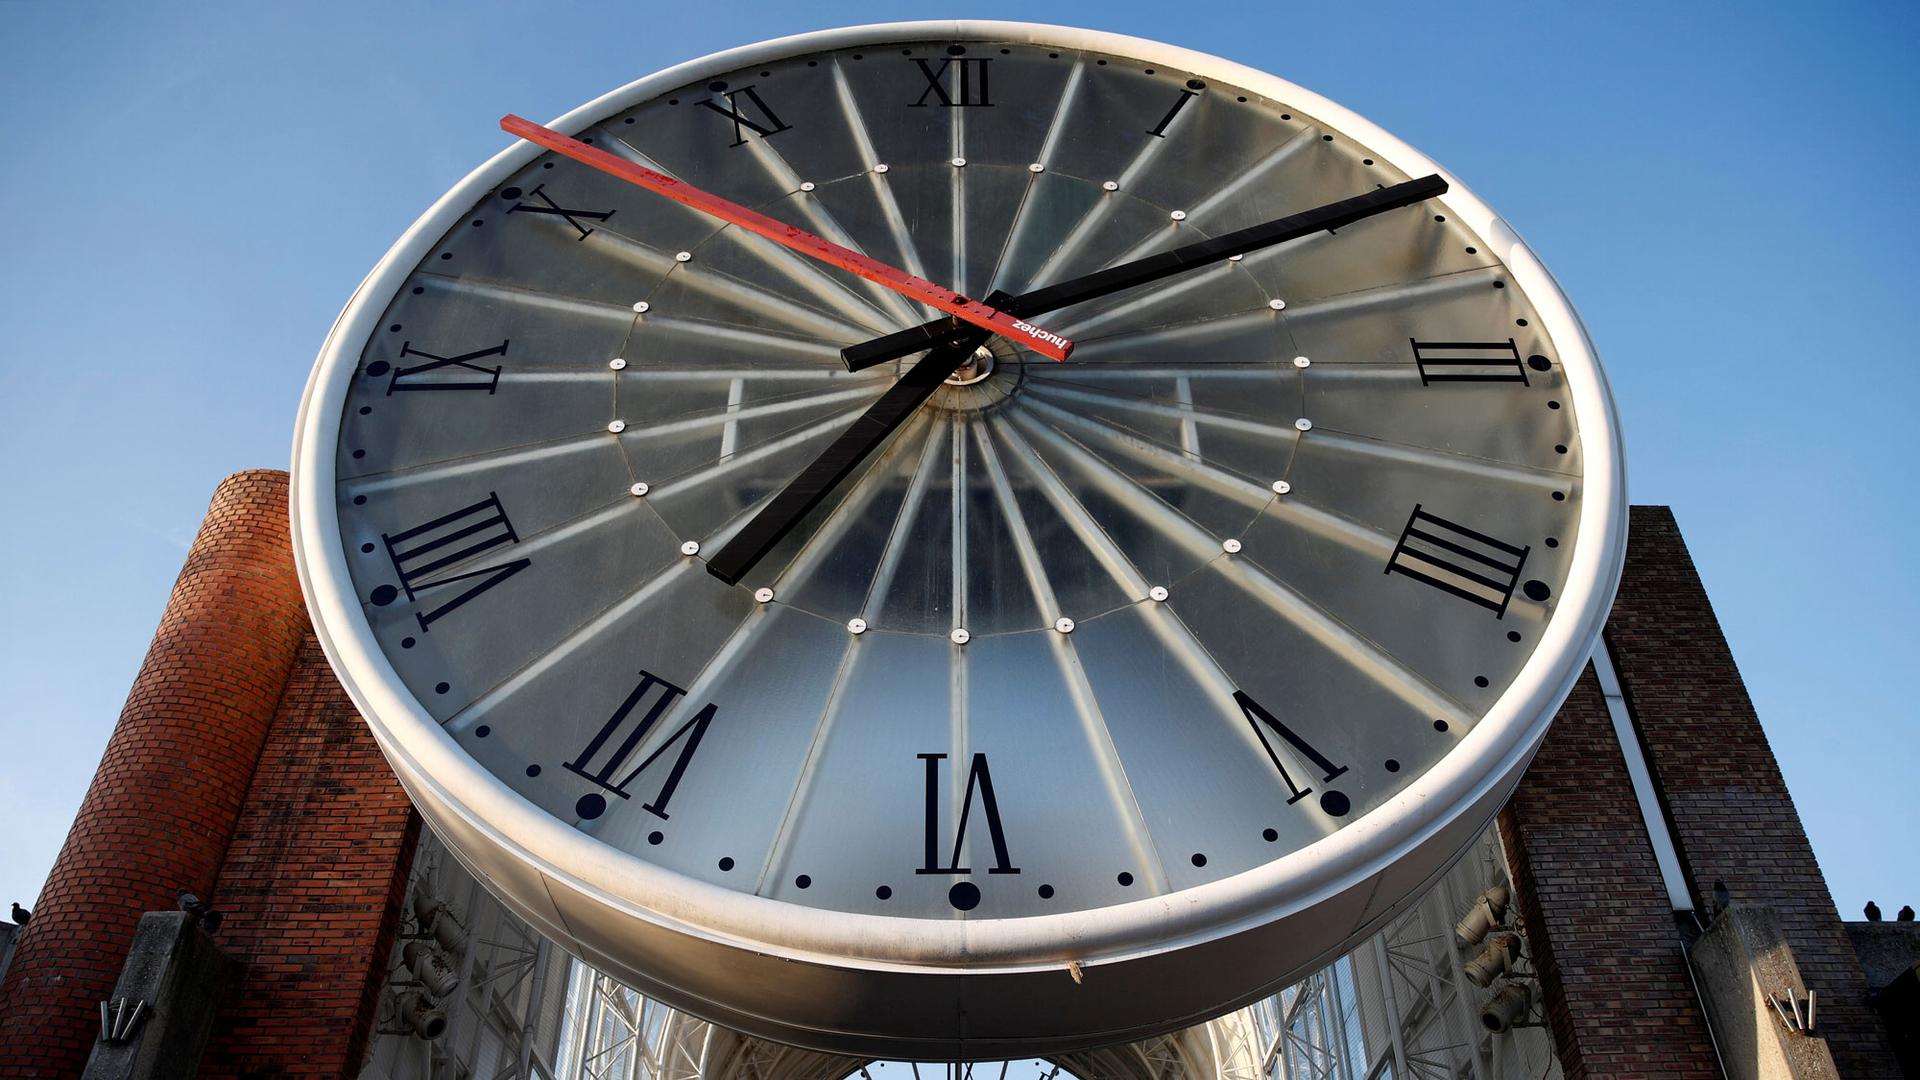 The large clock face over the entrance of Cergy-Saint-Christophe railway station is shown with the time of 7:10.